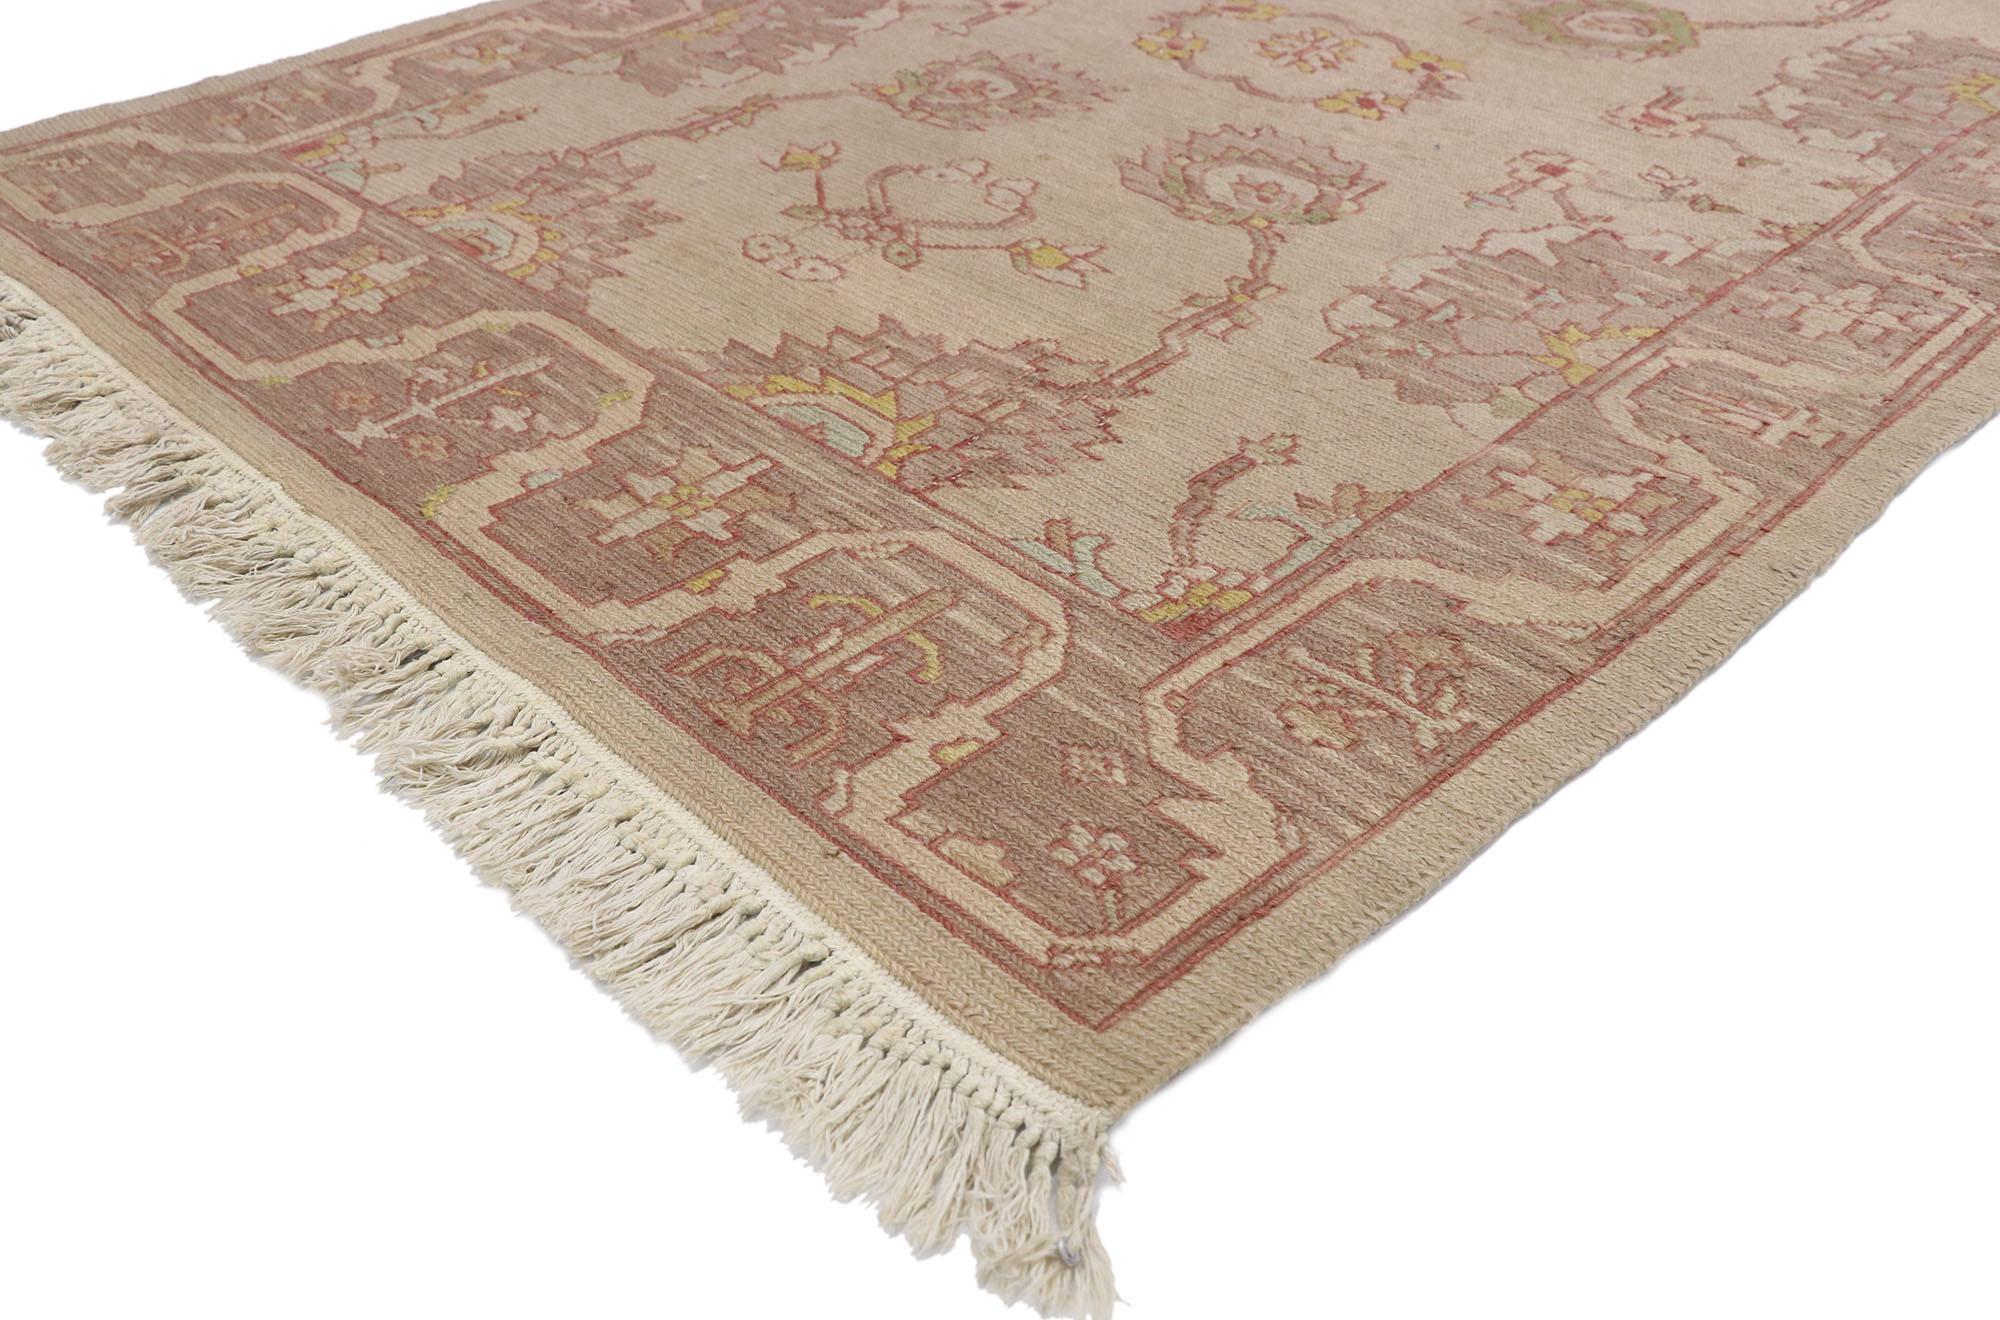 77380, vintage Persian Soumak rug with English Country style, flat-weave Kilim rug. With it's warm bucolic charm and soft hues, this handwoven wool vintage Persian Soumak rug beautifully highlights English Country style. It features a geometric